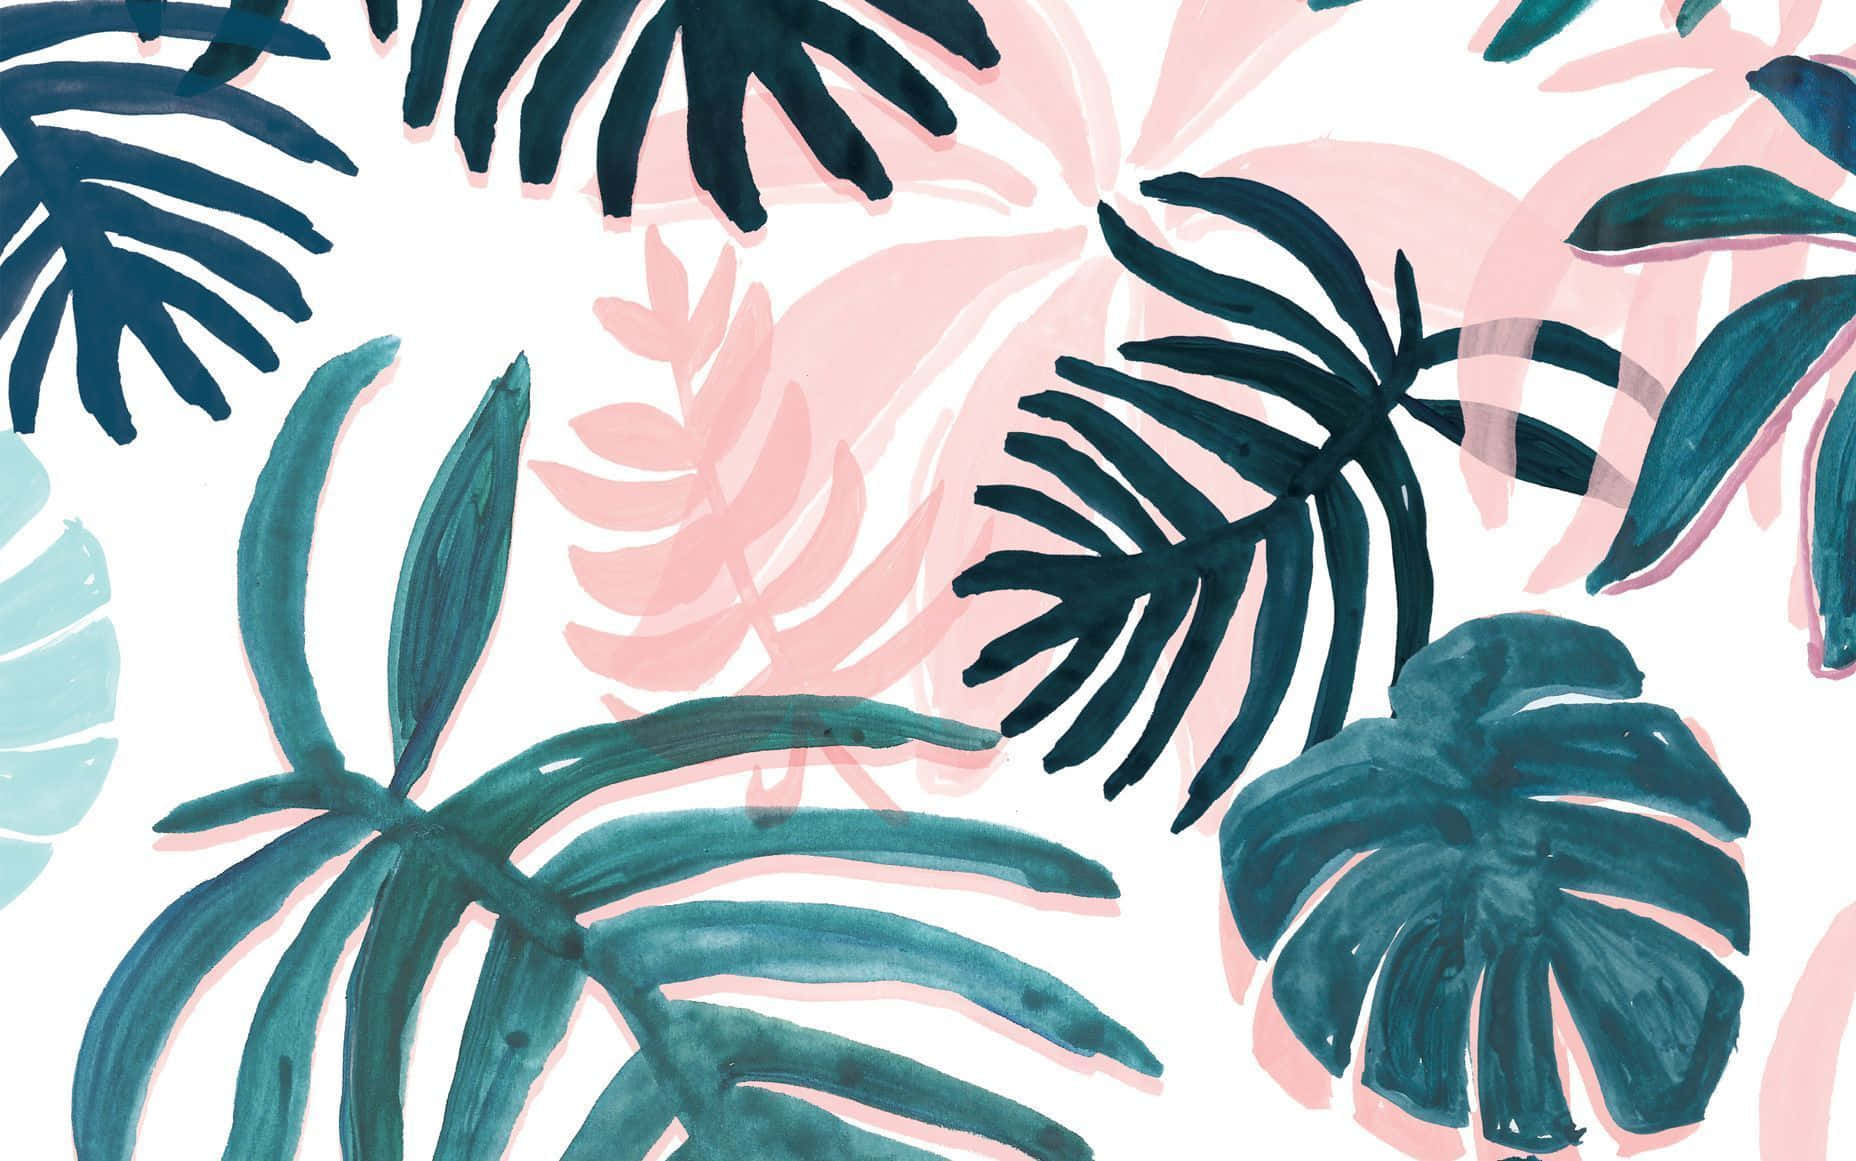 "Bring the beauty of nature to your tech with this plant-inspired laptop wallpaper." Wallpaper